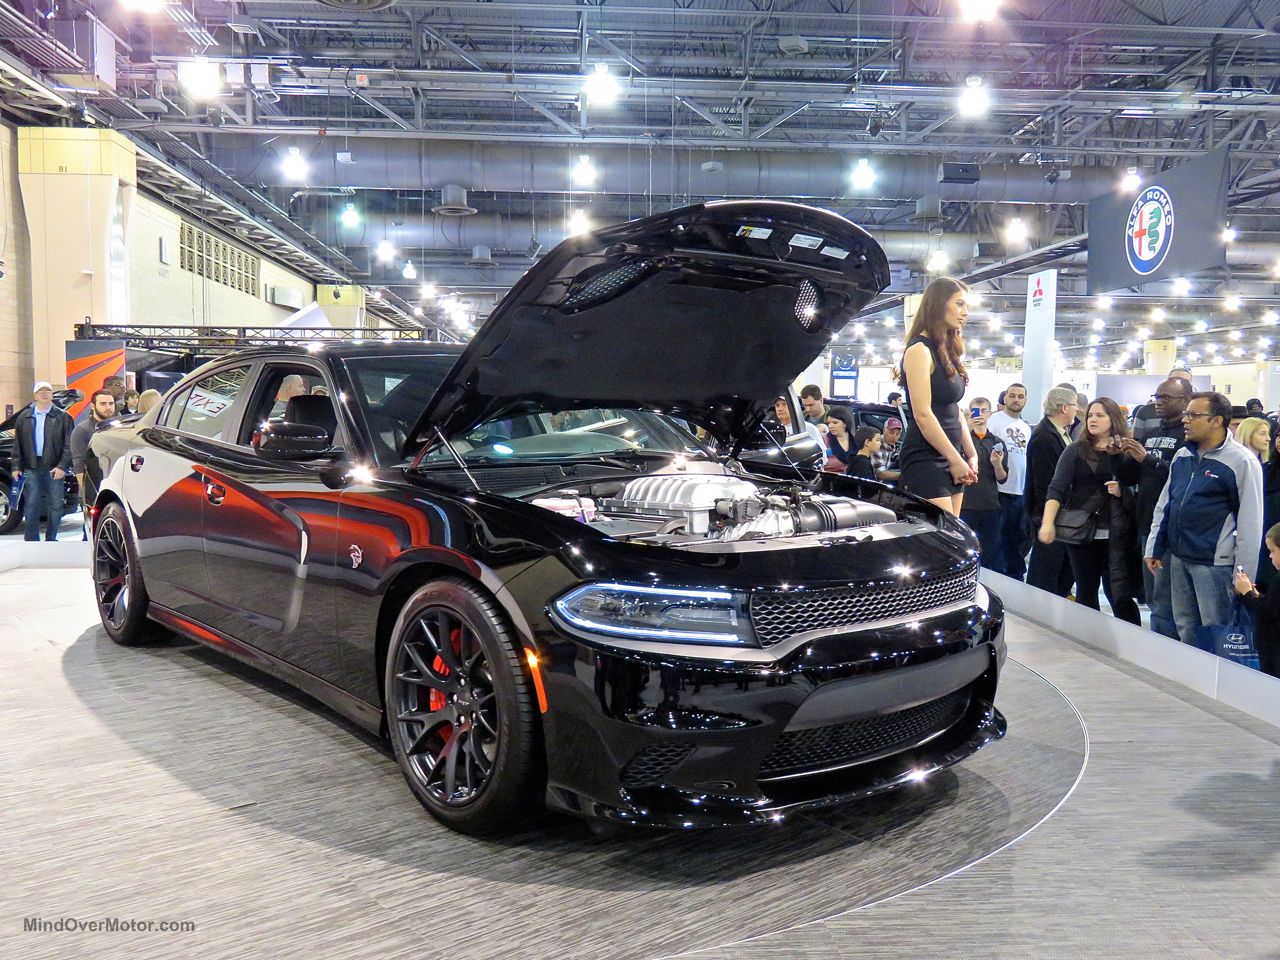 Philly Auto Show 2016 Dodge Charger Hellcat